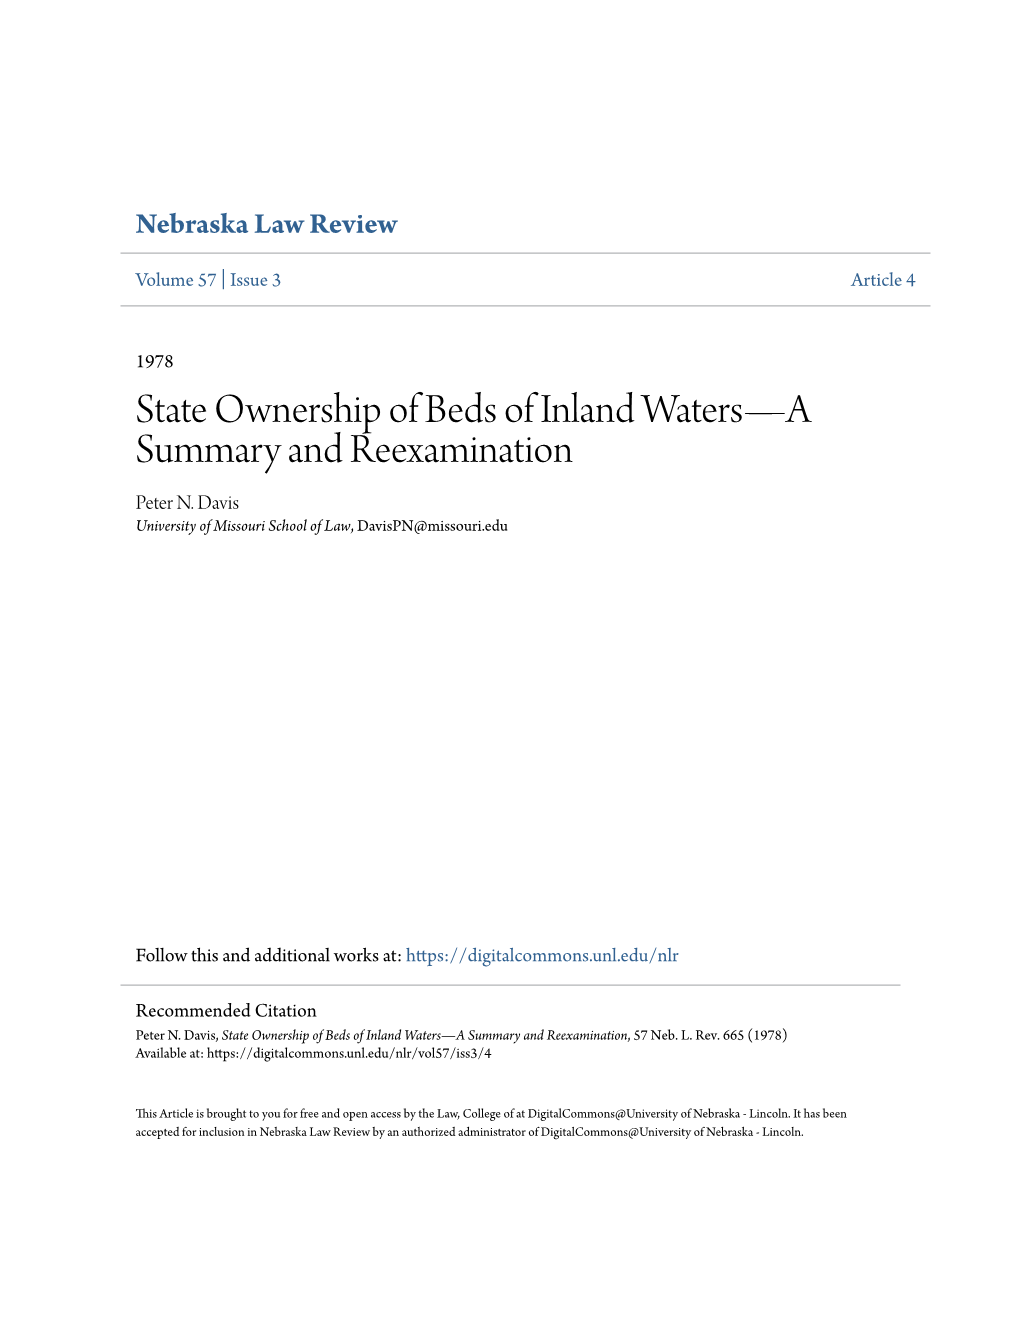 State Ownership of Beds of Inland Waters—A Summary and Reexamination Peter N